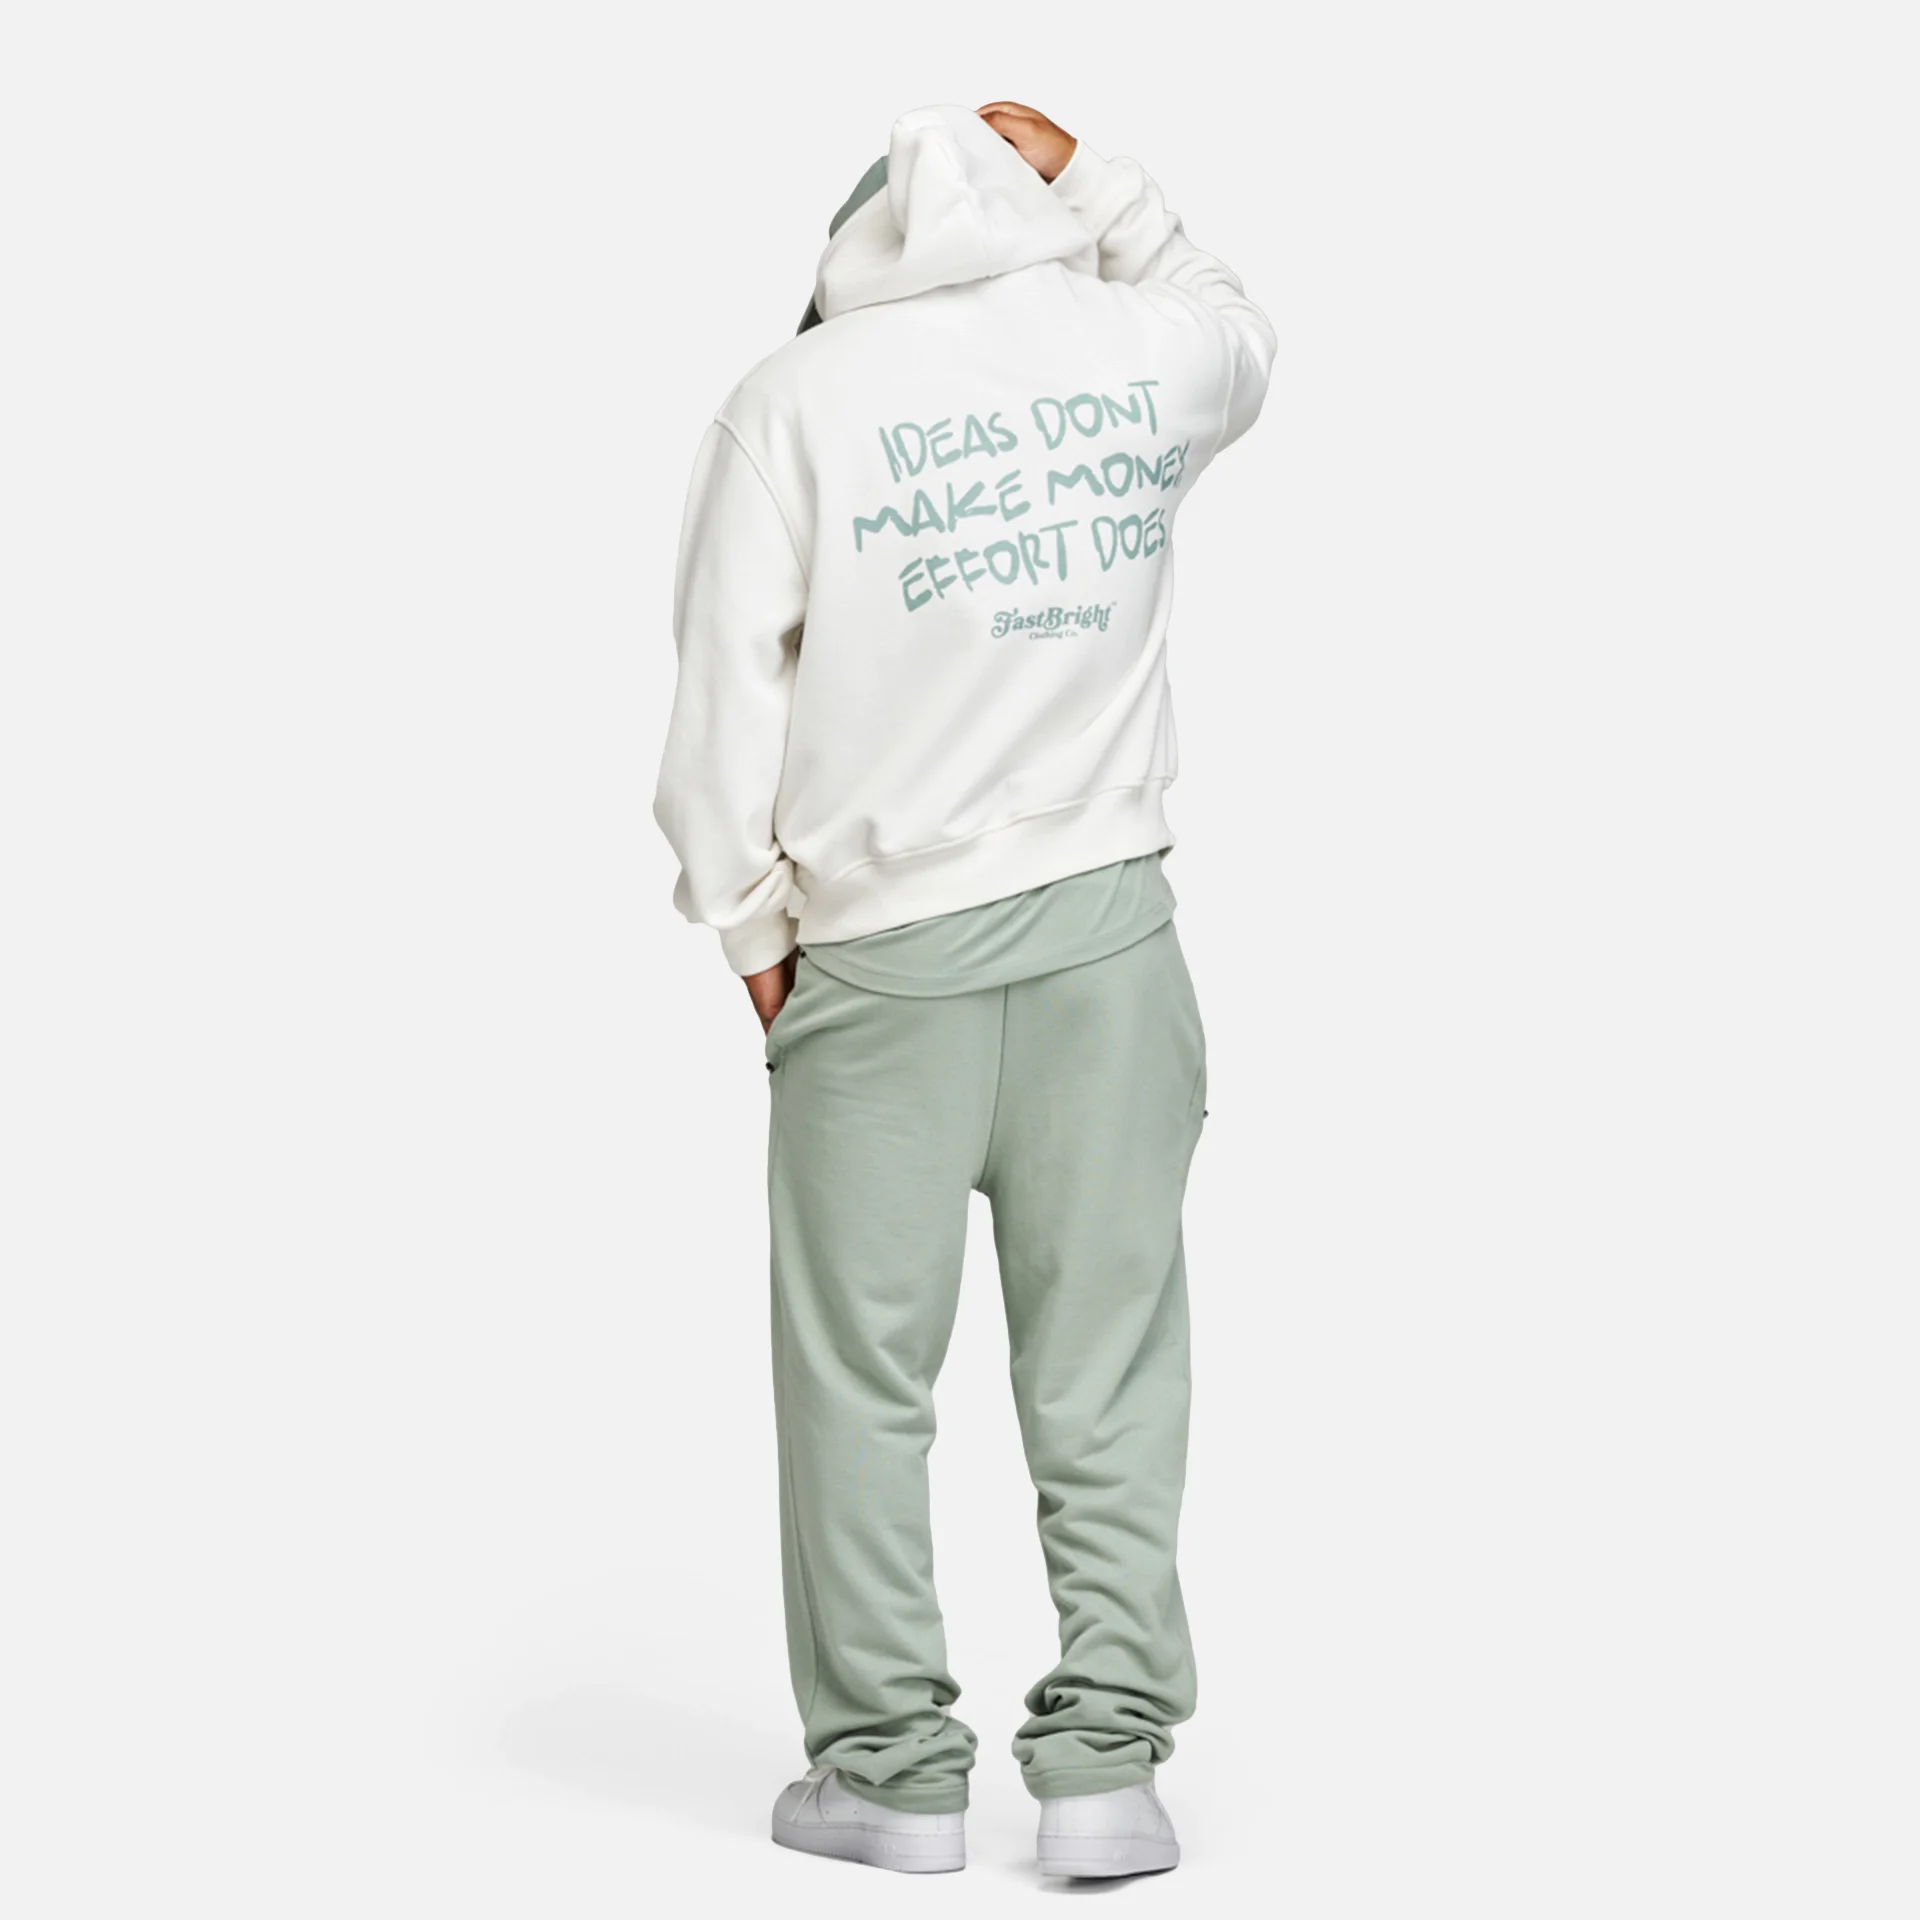 Fast and Bright Effort Hoodie White